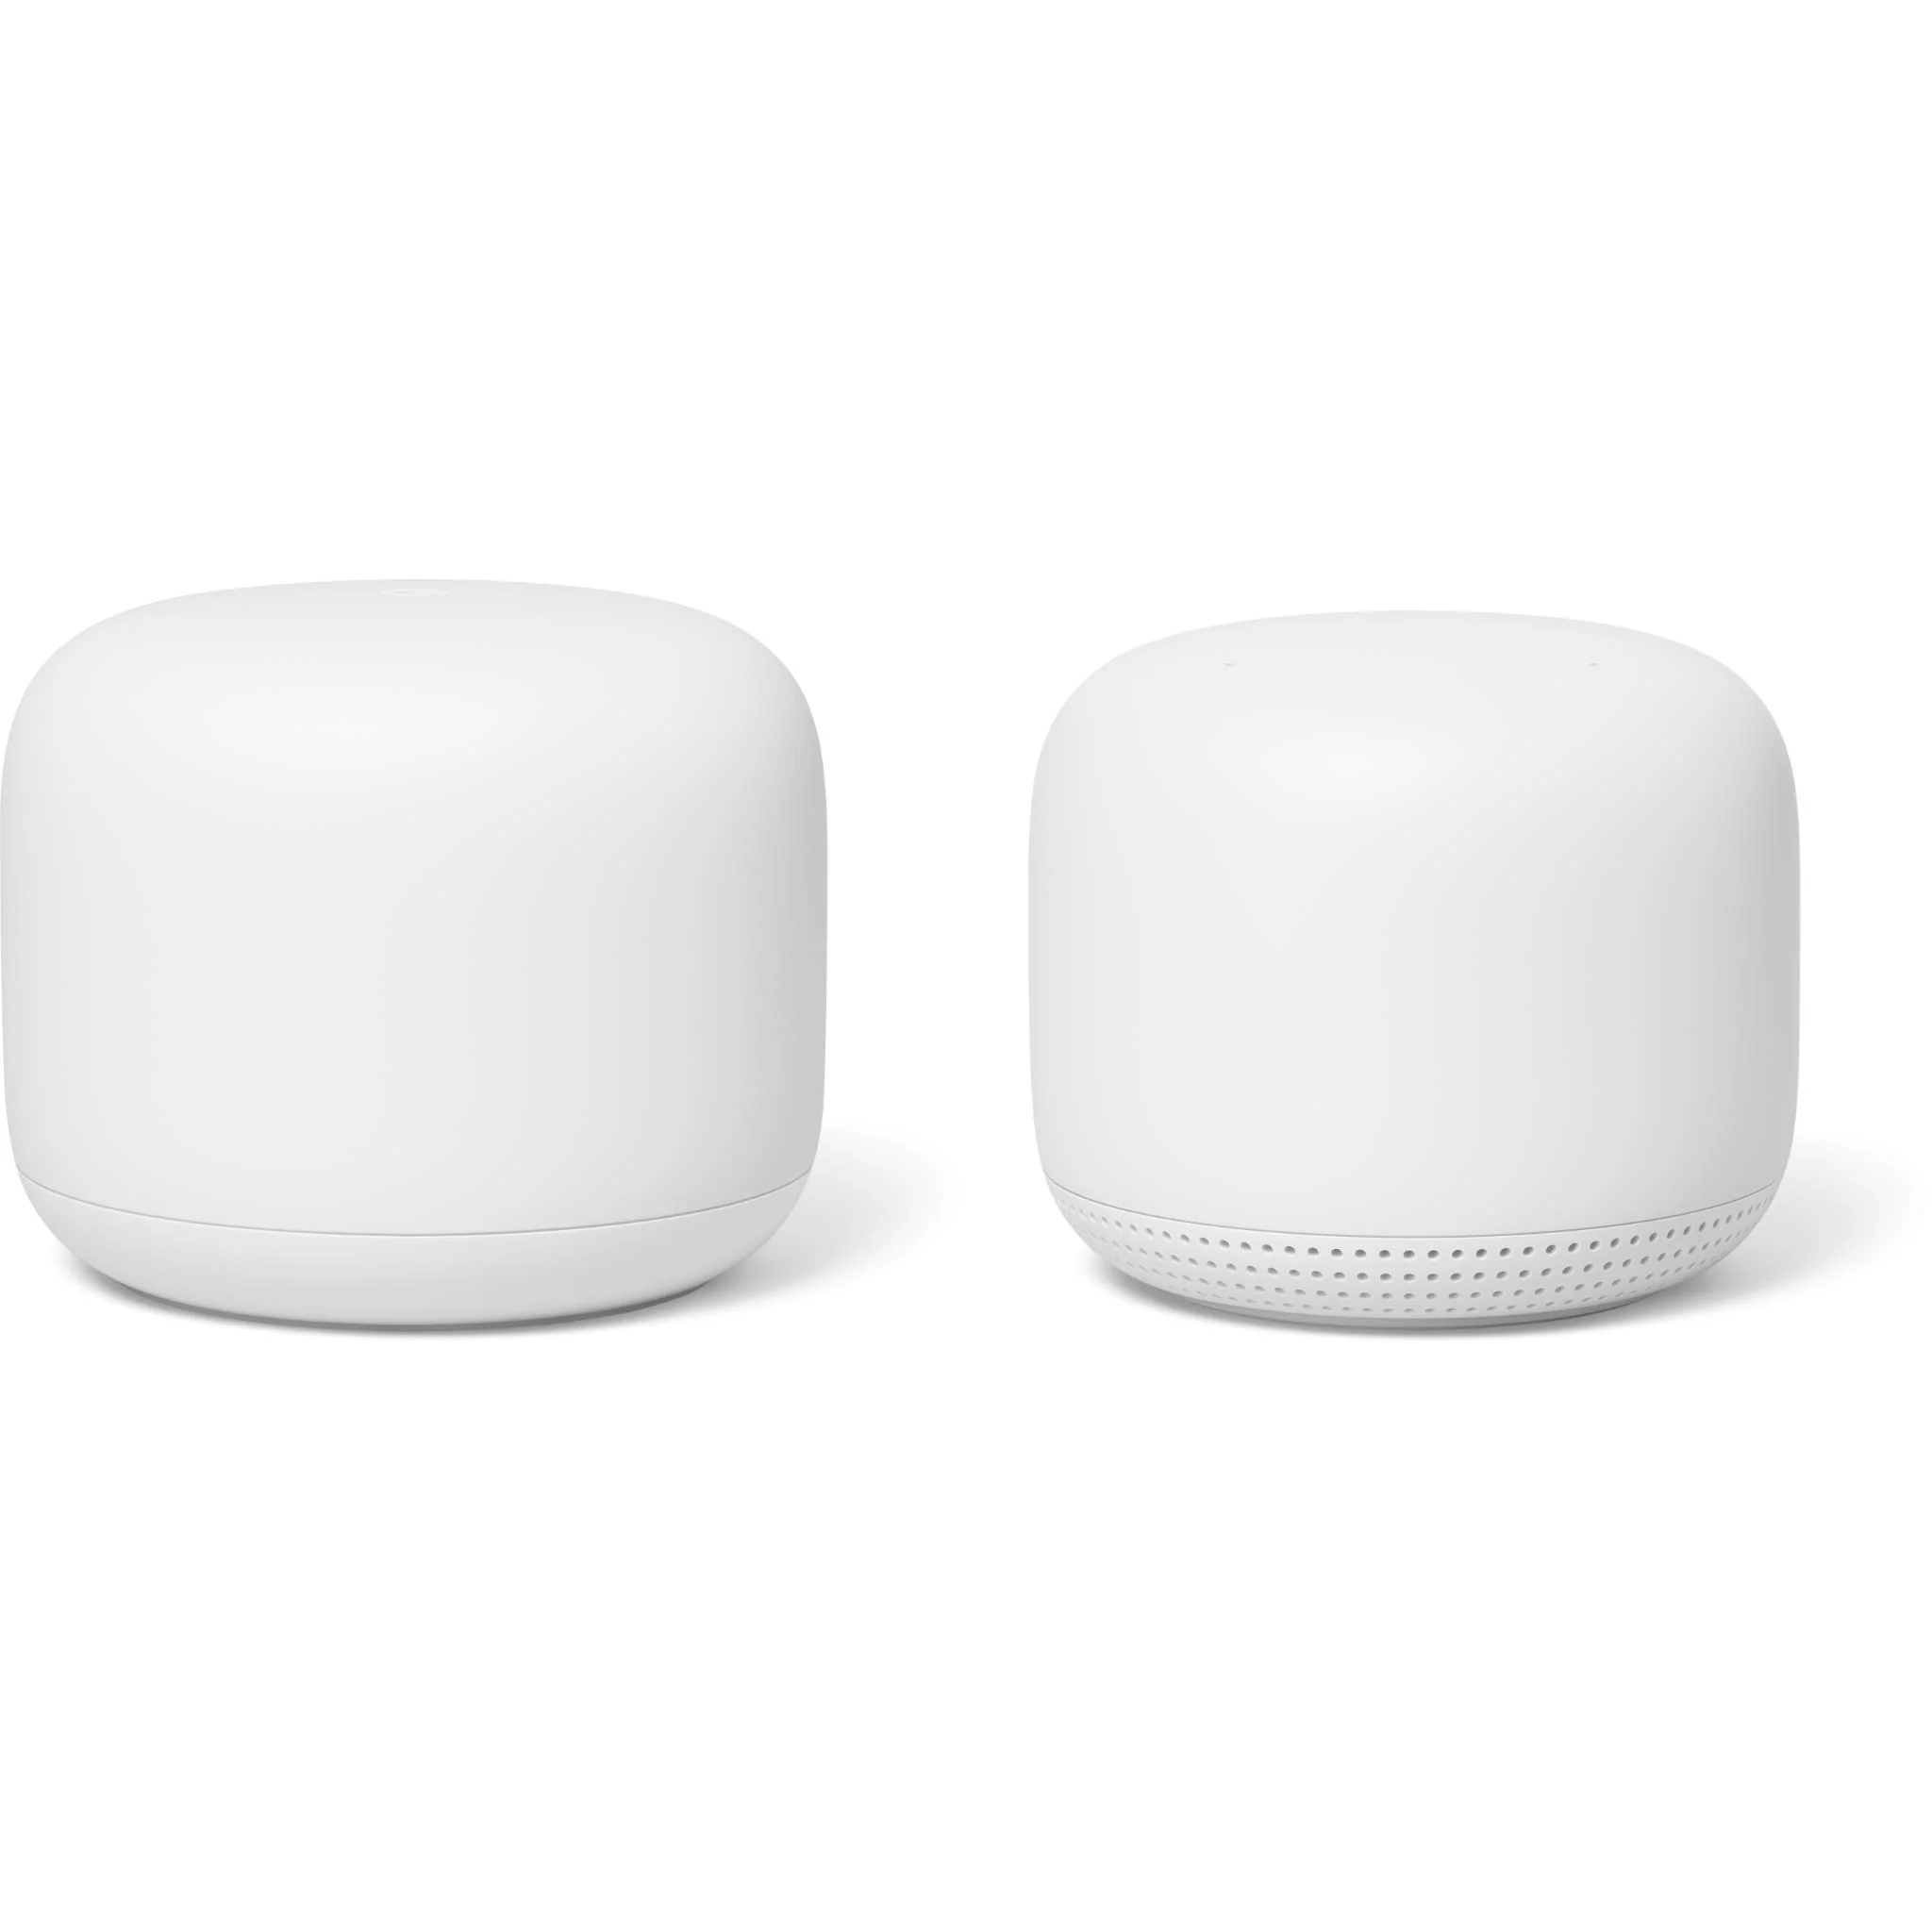 Google Nest Wifi Home Mesh Wi-Fi System 2pk (Base Router + 1 Wifi Point Extender Point)